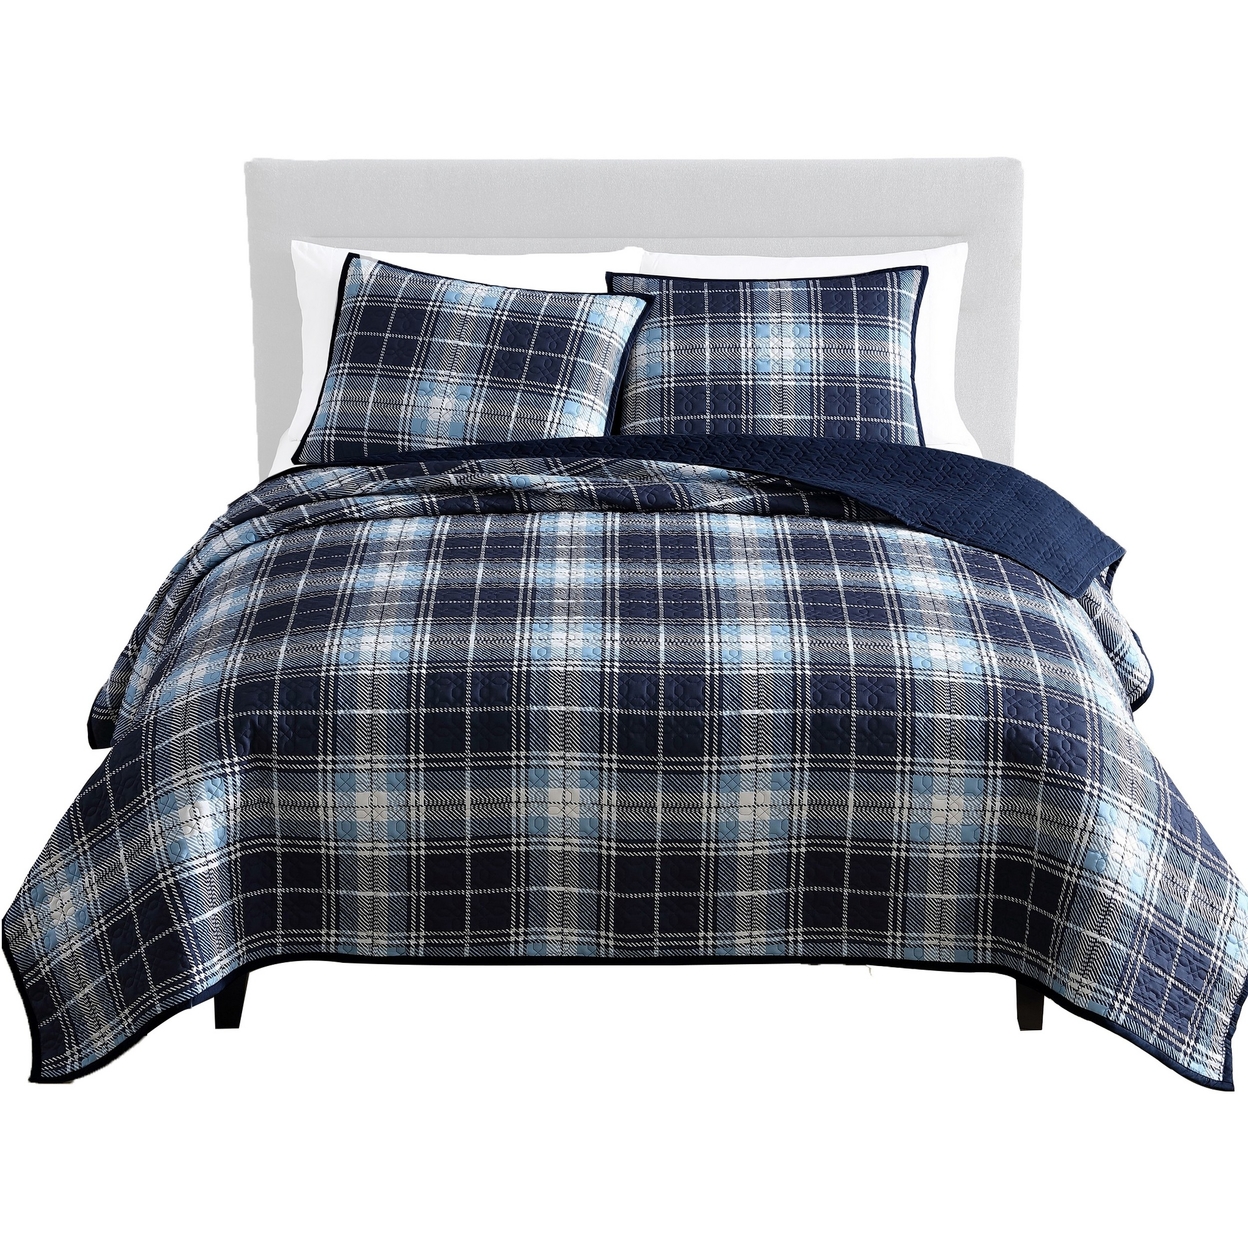 Ivy 3 Piece Full Queen Plaid Coverlet With Matching Shams, Blue, White - Saltoro Sherpi